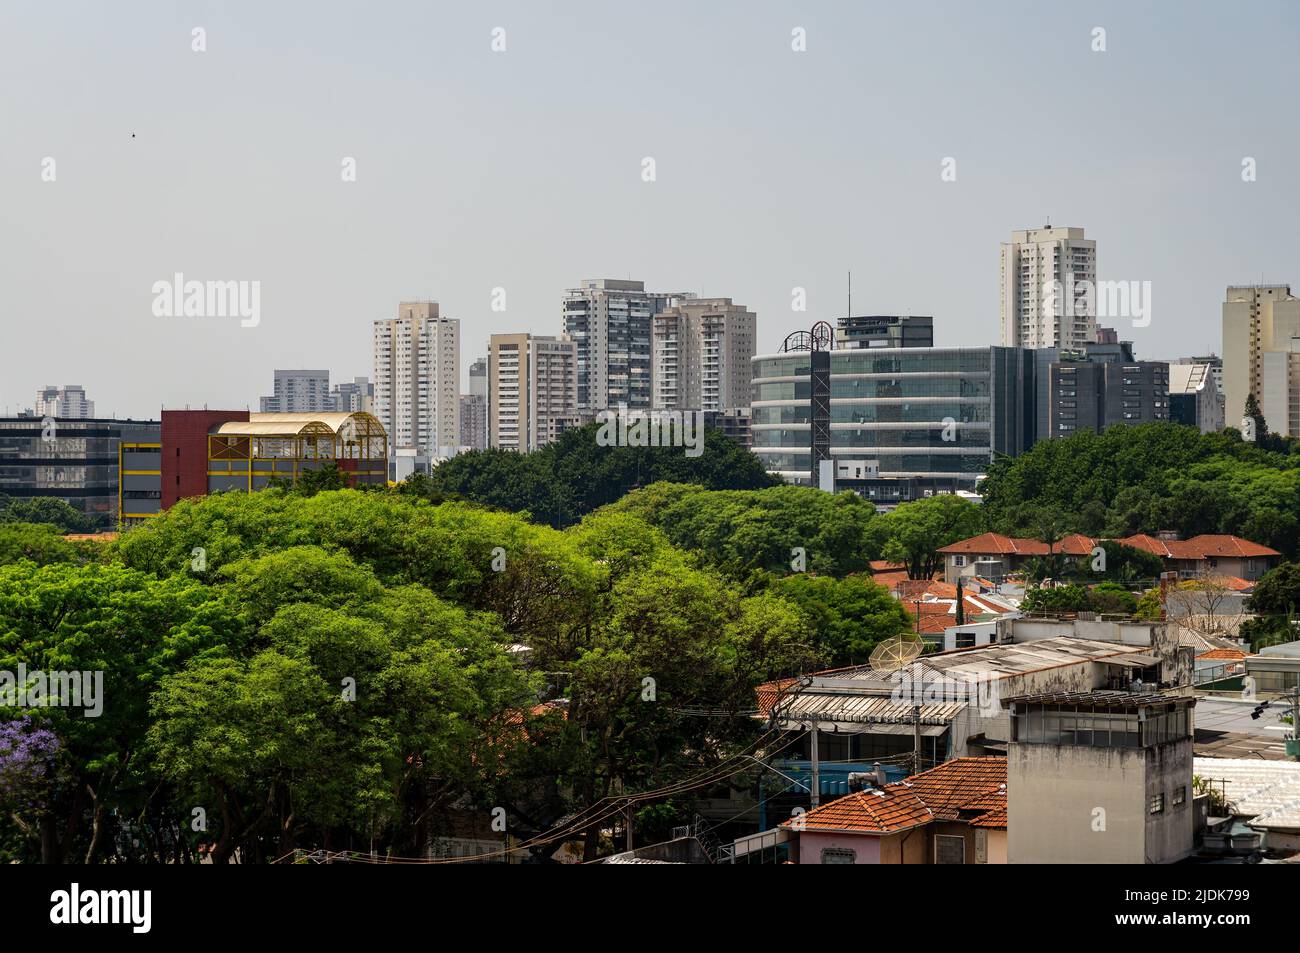 Cityscape view of Agua Branca and Barra funda districts with many high rise buildings and tall green vegetation trees in sight under sunny blue sky. Stock Photo